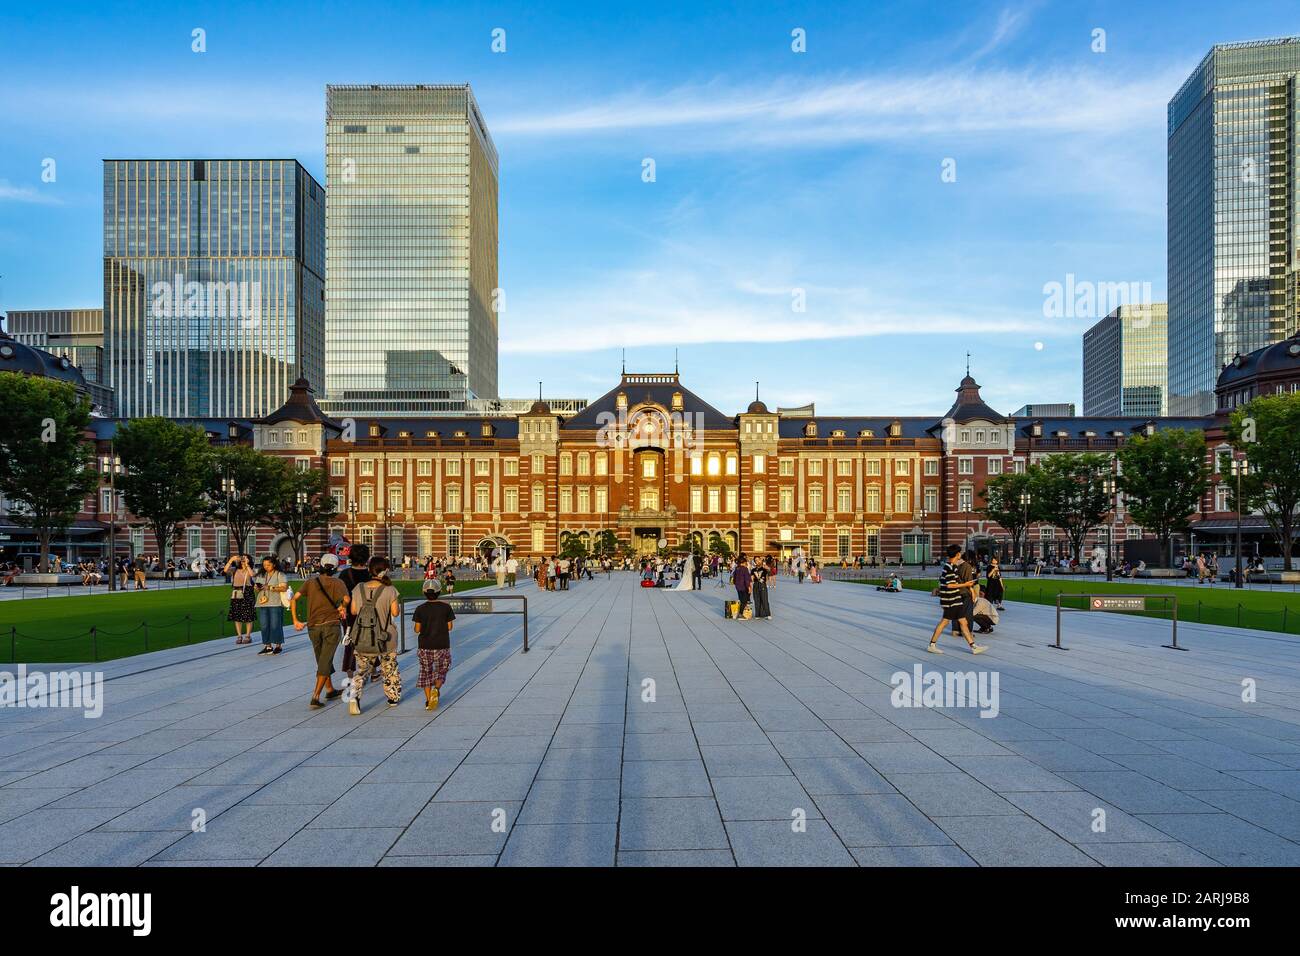 Exterior of Tokyo Station on the Marunouchi side. Tokyo station was built in 1914 in European style architecture. Tokyo, Japan, August 2019 Stock Photo